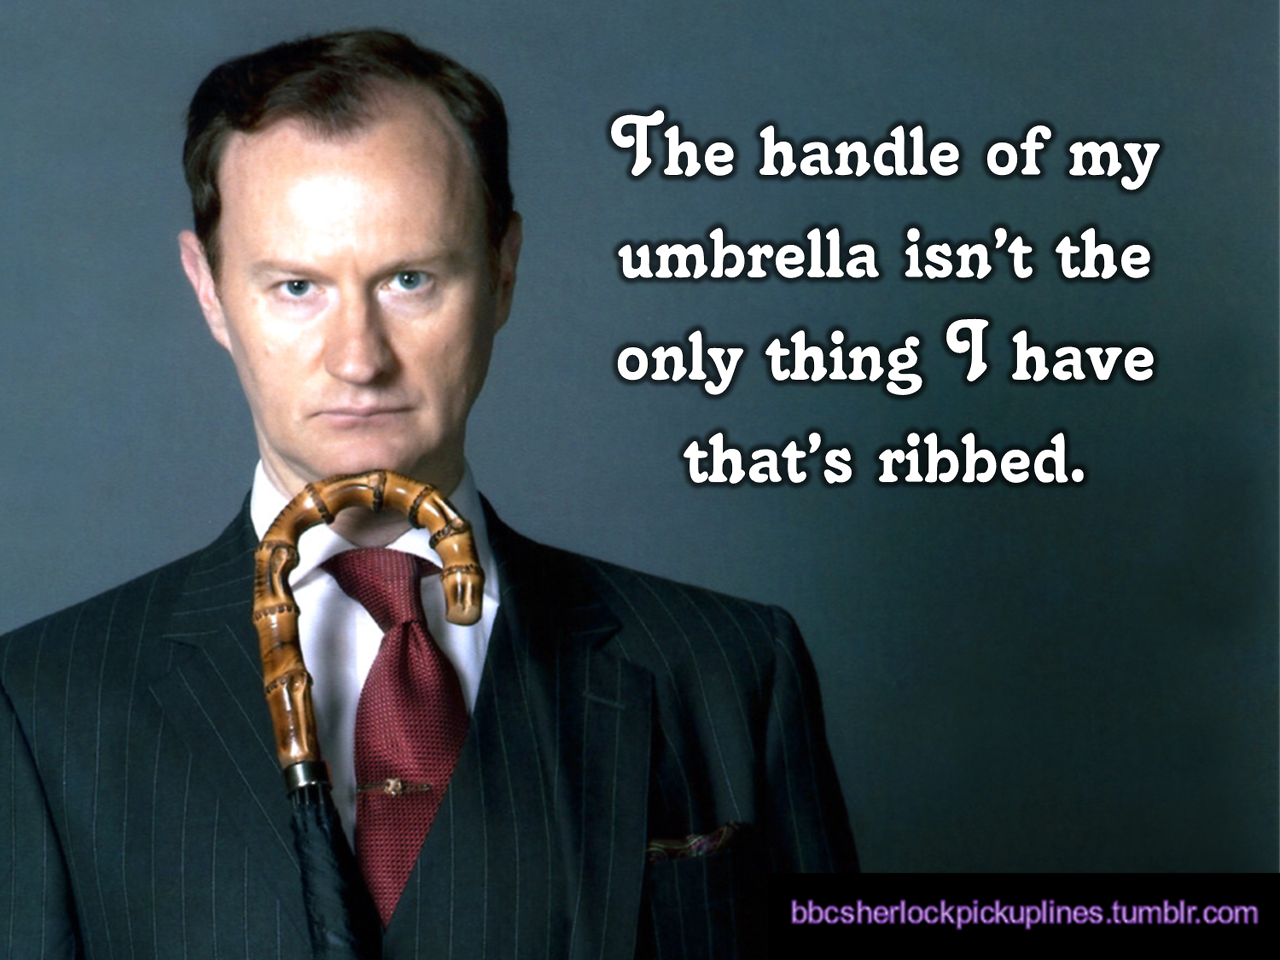 The tale of a boy, his very special umbrella, and a few jealous people.